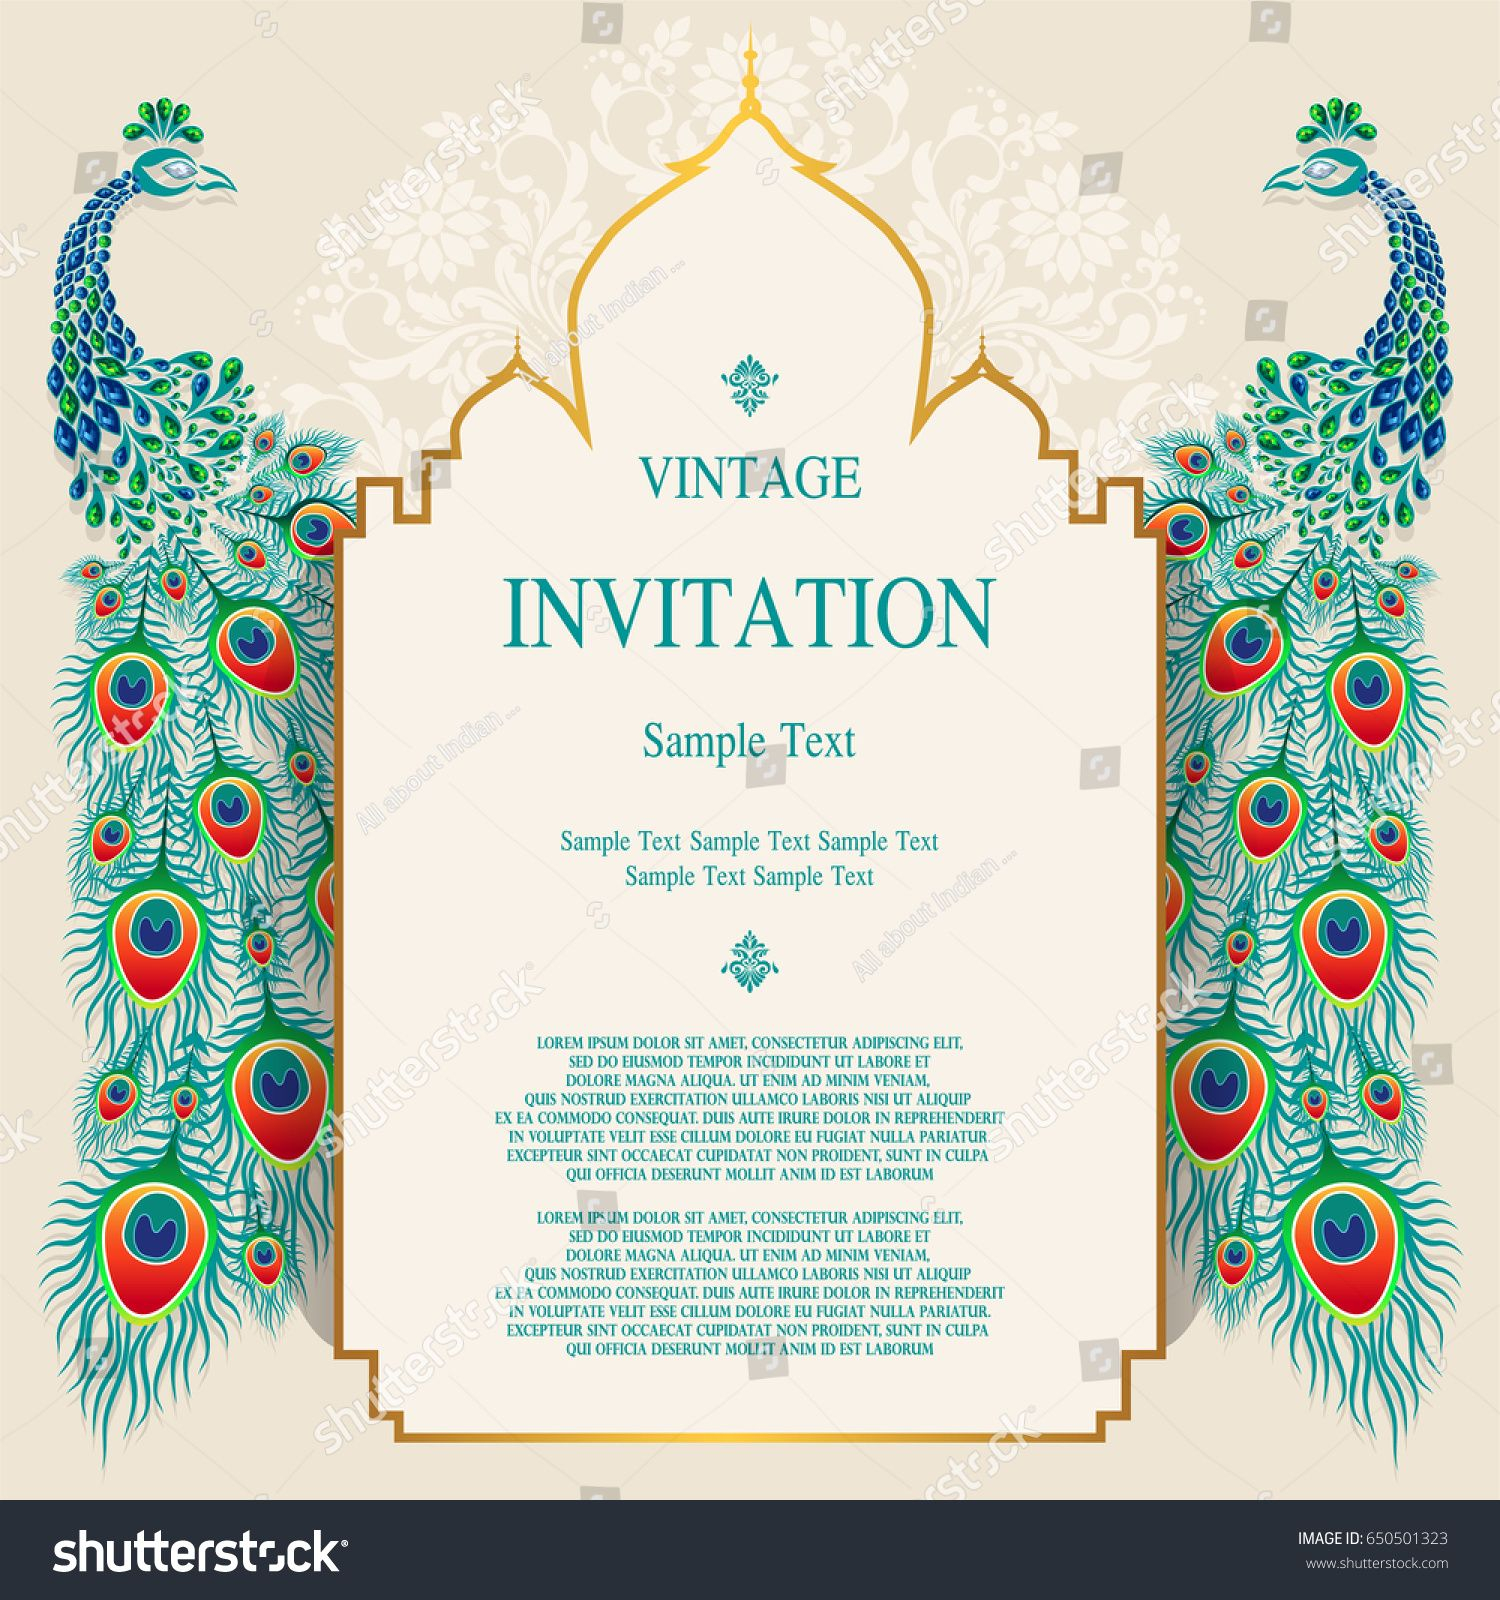 Wedding Invitation Card Templates With Peacock Patterned And inside dimensions 1500 X 1600